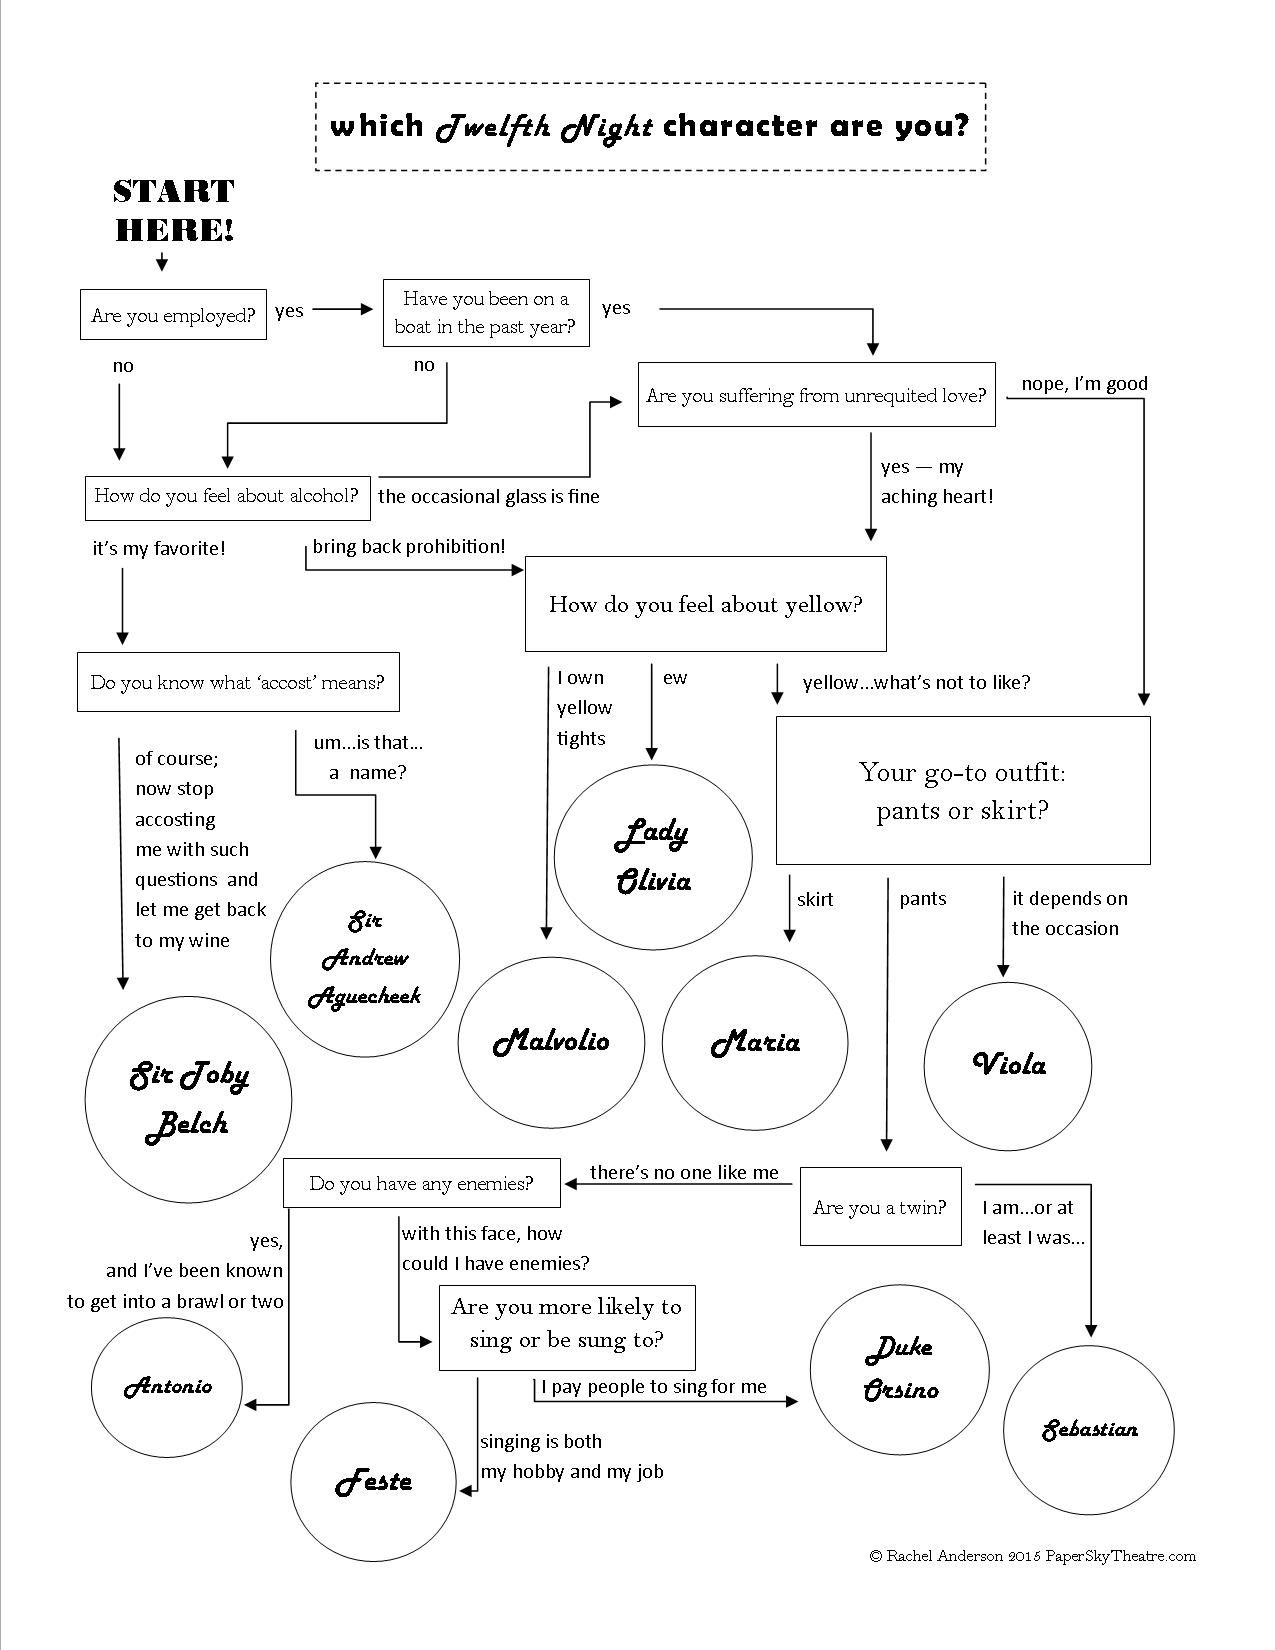 Twelfth Night Character Flow Chart: Olivia, Viola, Maria, Toby Belch - Free Printable Character Map